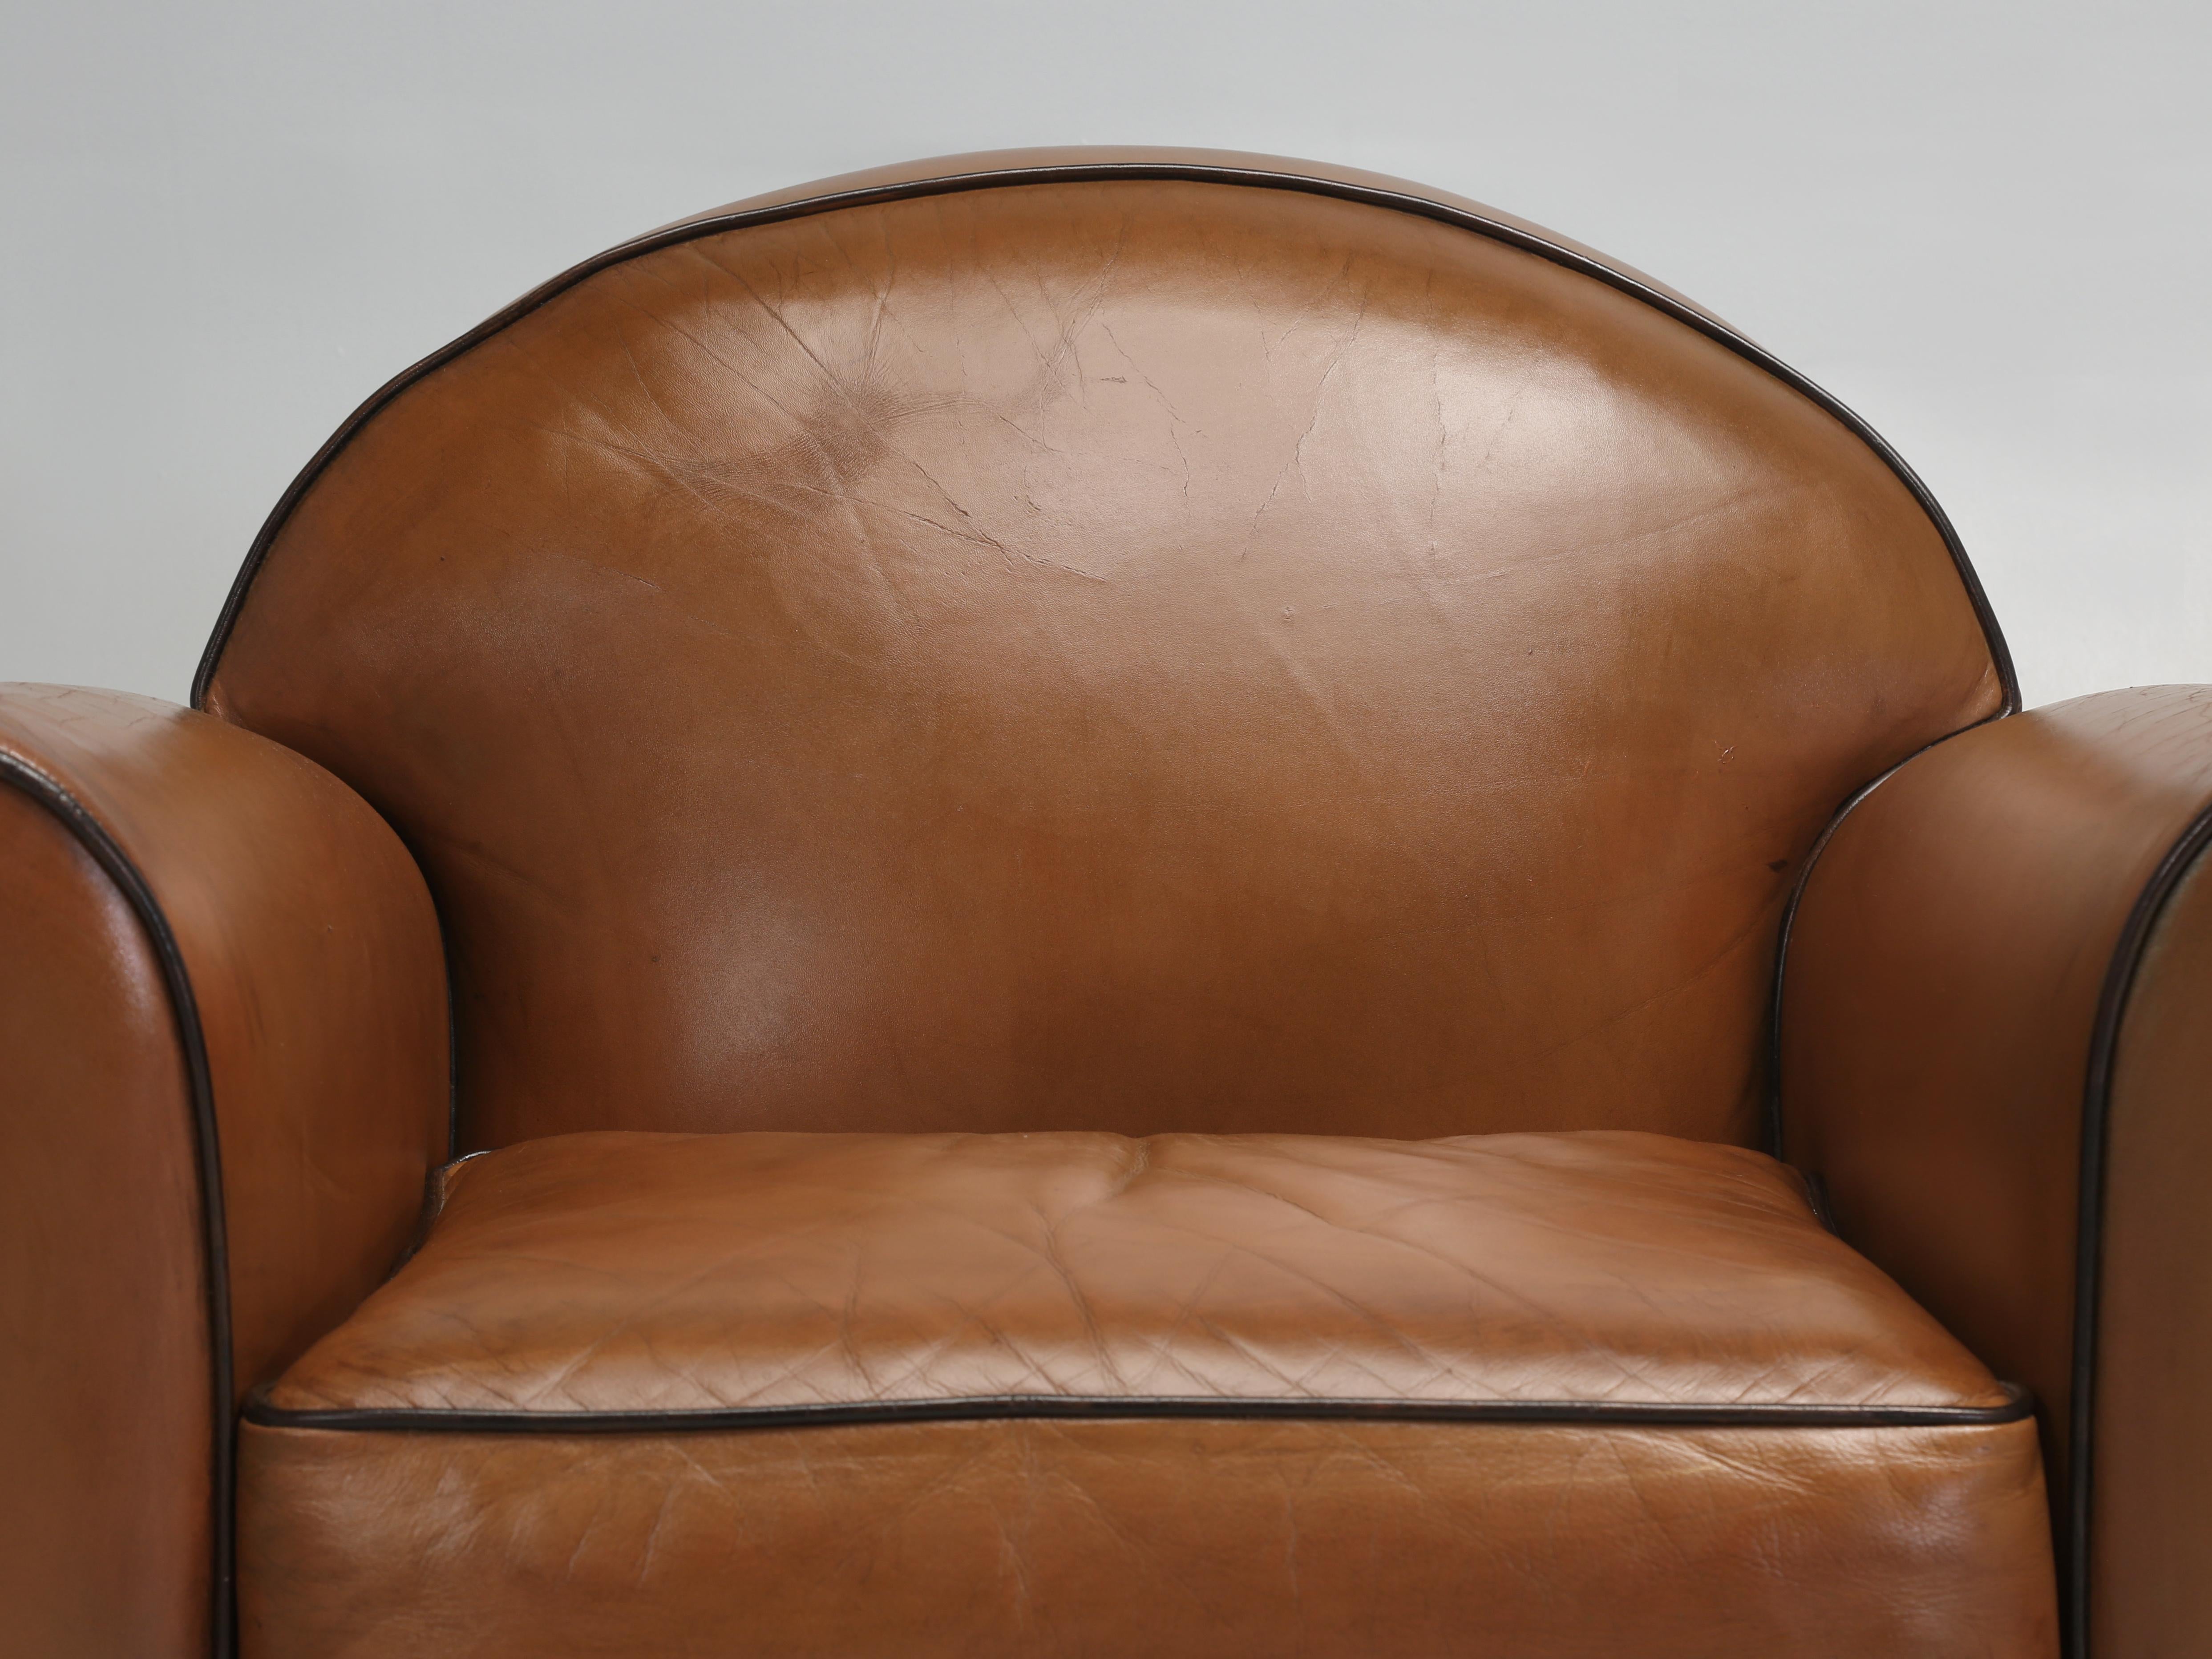 Vintage French Leather Club Chairs, produced by the French firm of HUGUES CHEVALIER of Paris, who also made the furniture for Cartier’s Head Office in Paris. Mr. Hugues Chevalier designs were inspired from the Art Deco period and this particular